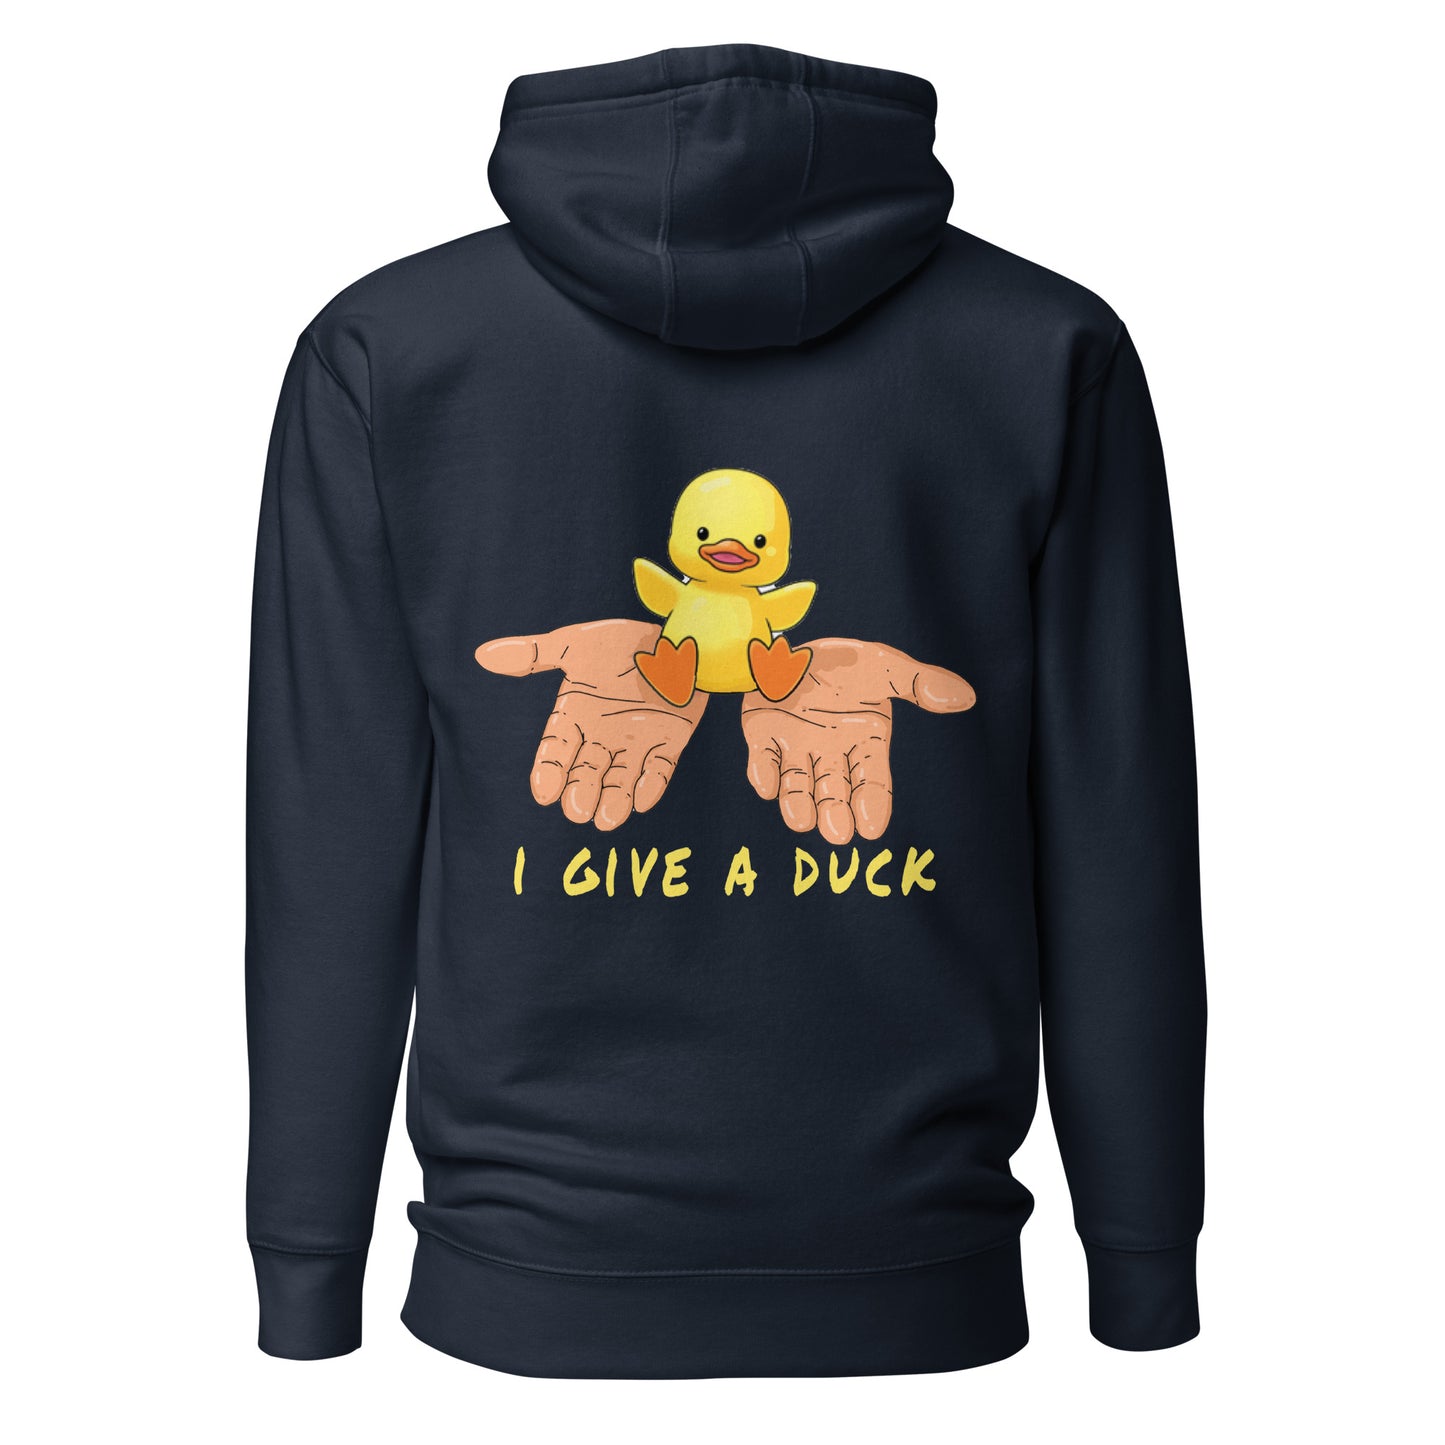 "I Give A Duck" Hoodie